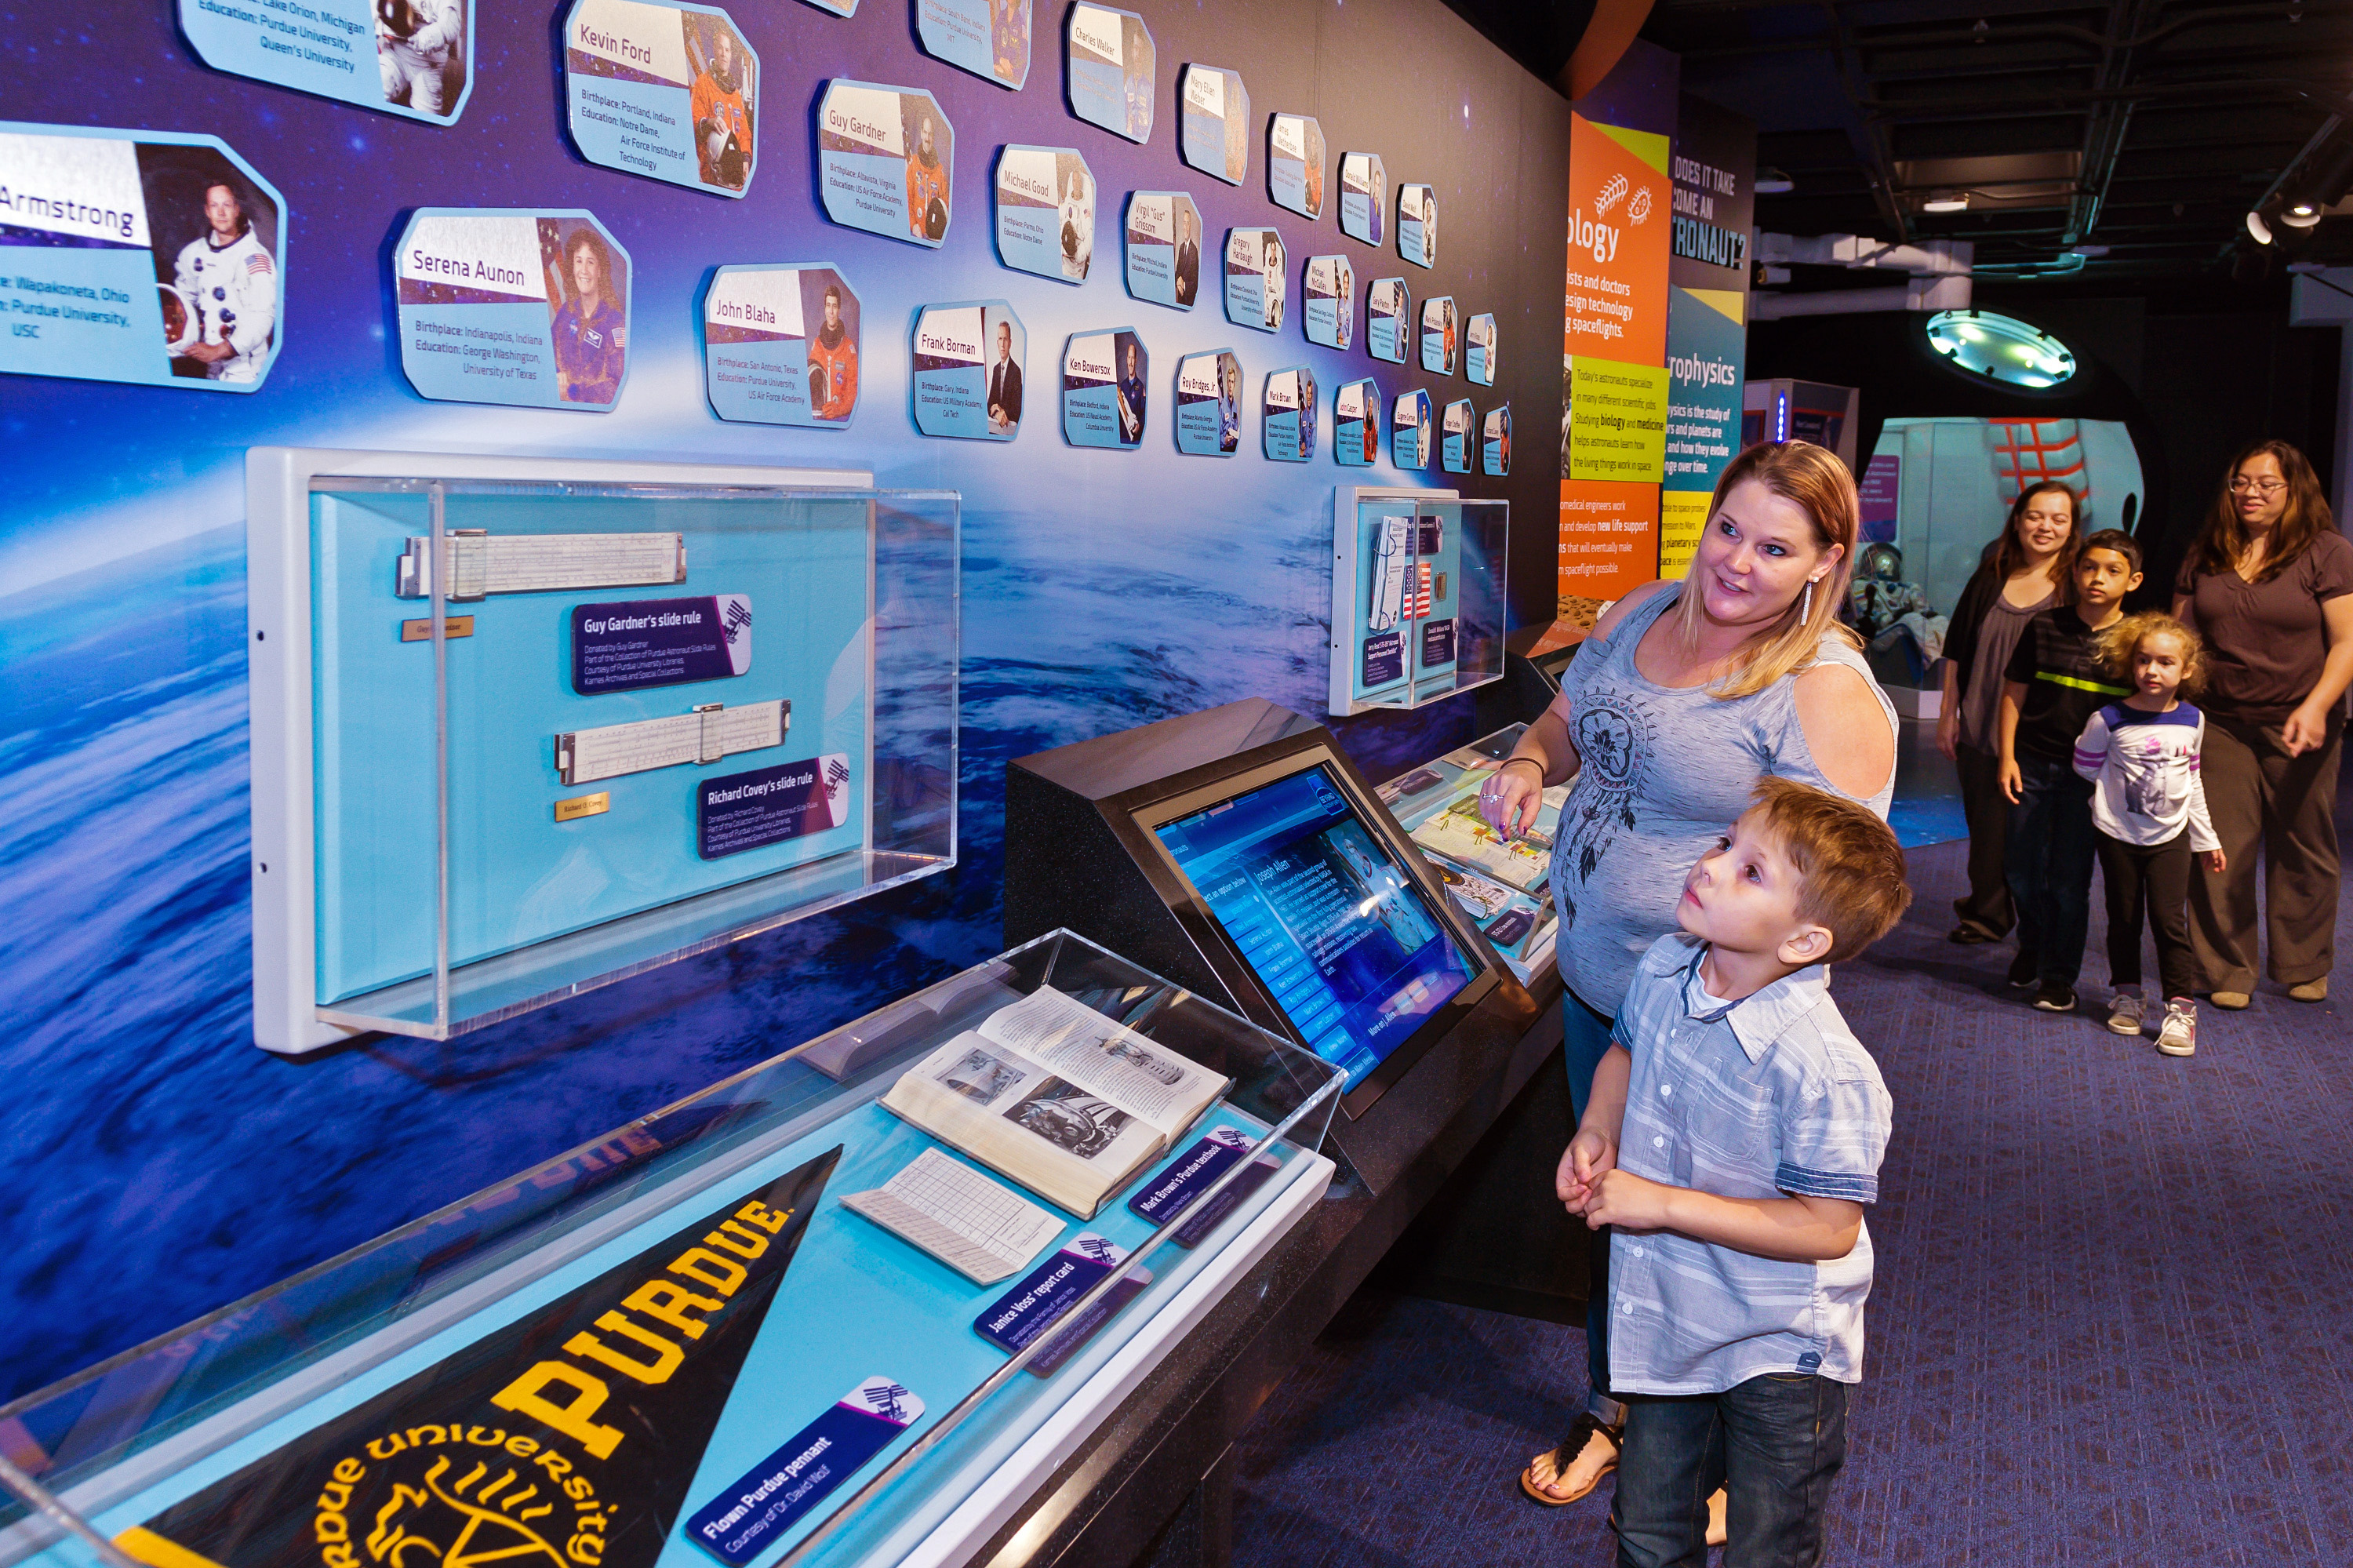 Neil Armstrong got his scientific start in Indiana - learn more about it at the Indiana Astronaut Wall of Fame in Beyond Spaceship Earth at the world's largest children's museum.